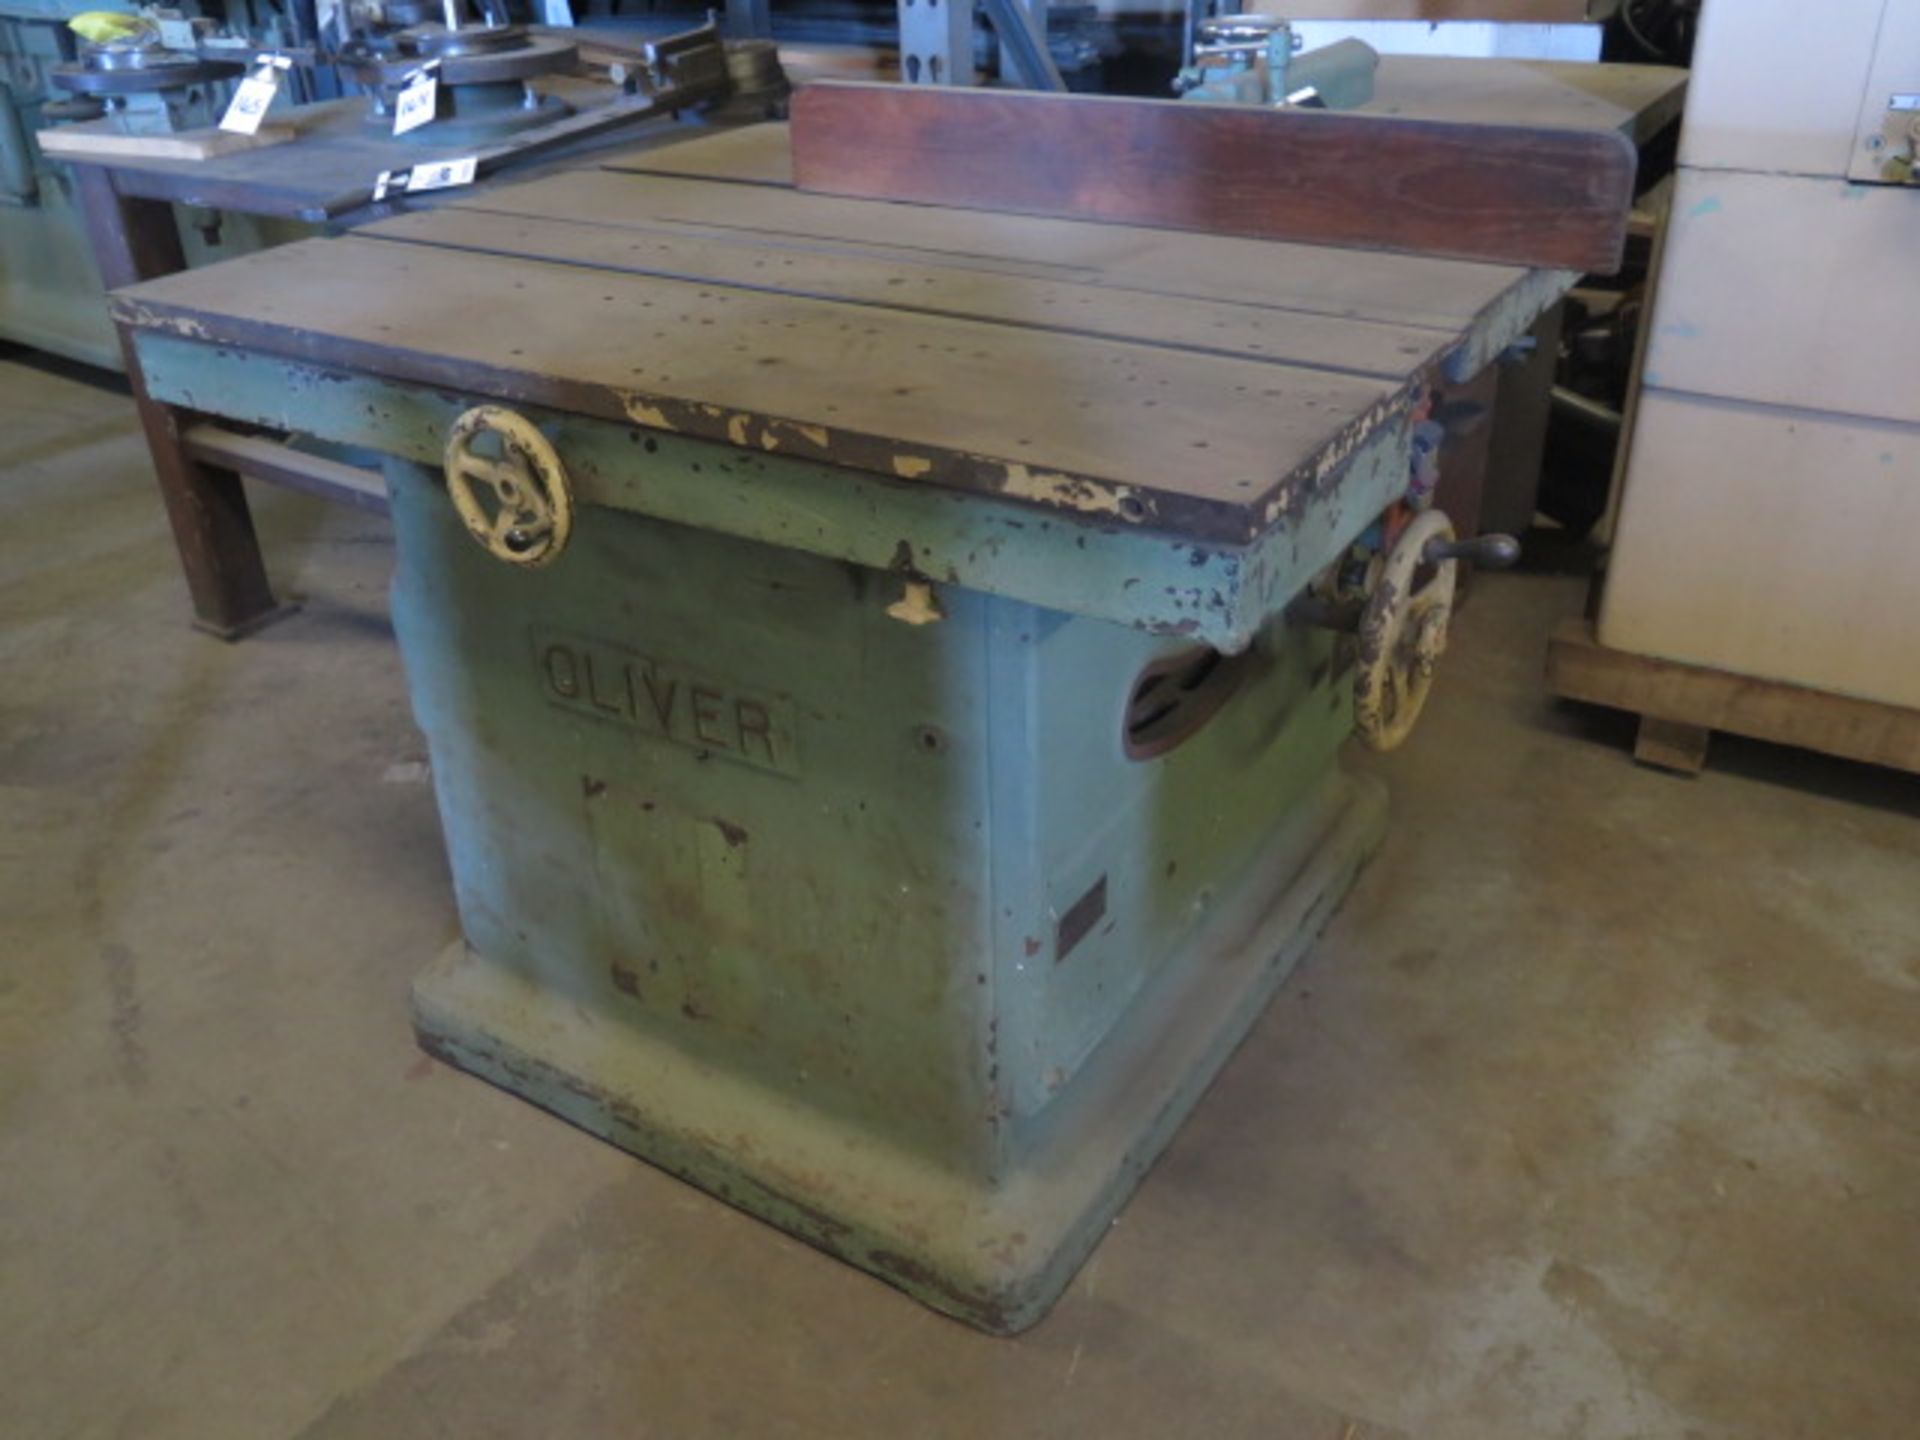 Oliver mdl. 88D 16” Sliding Table Tilting Arbor Table Saw s/n 76078 w/ 17 ½” x 44 ½” Table, Fence